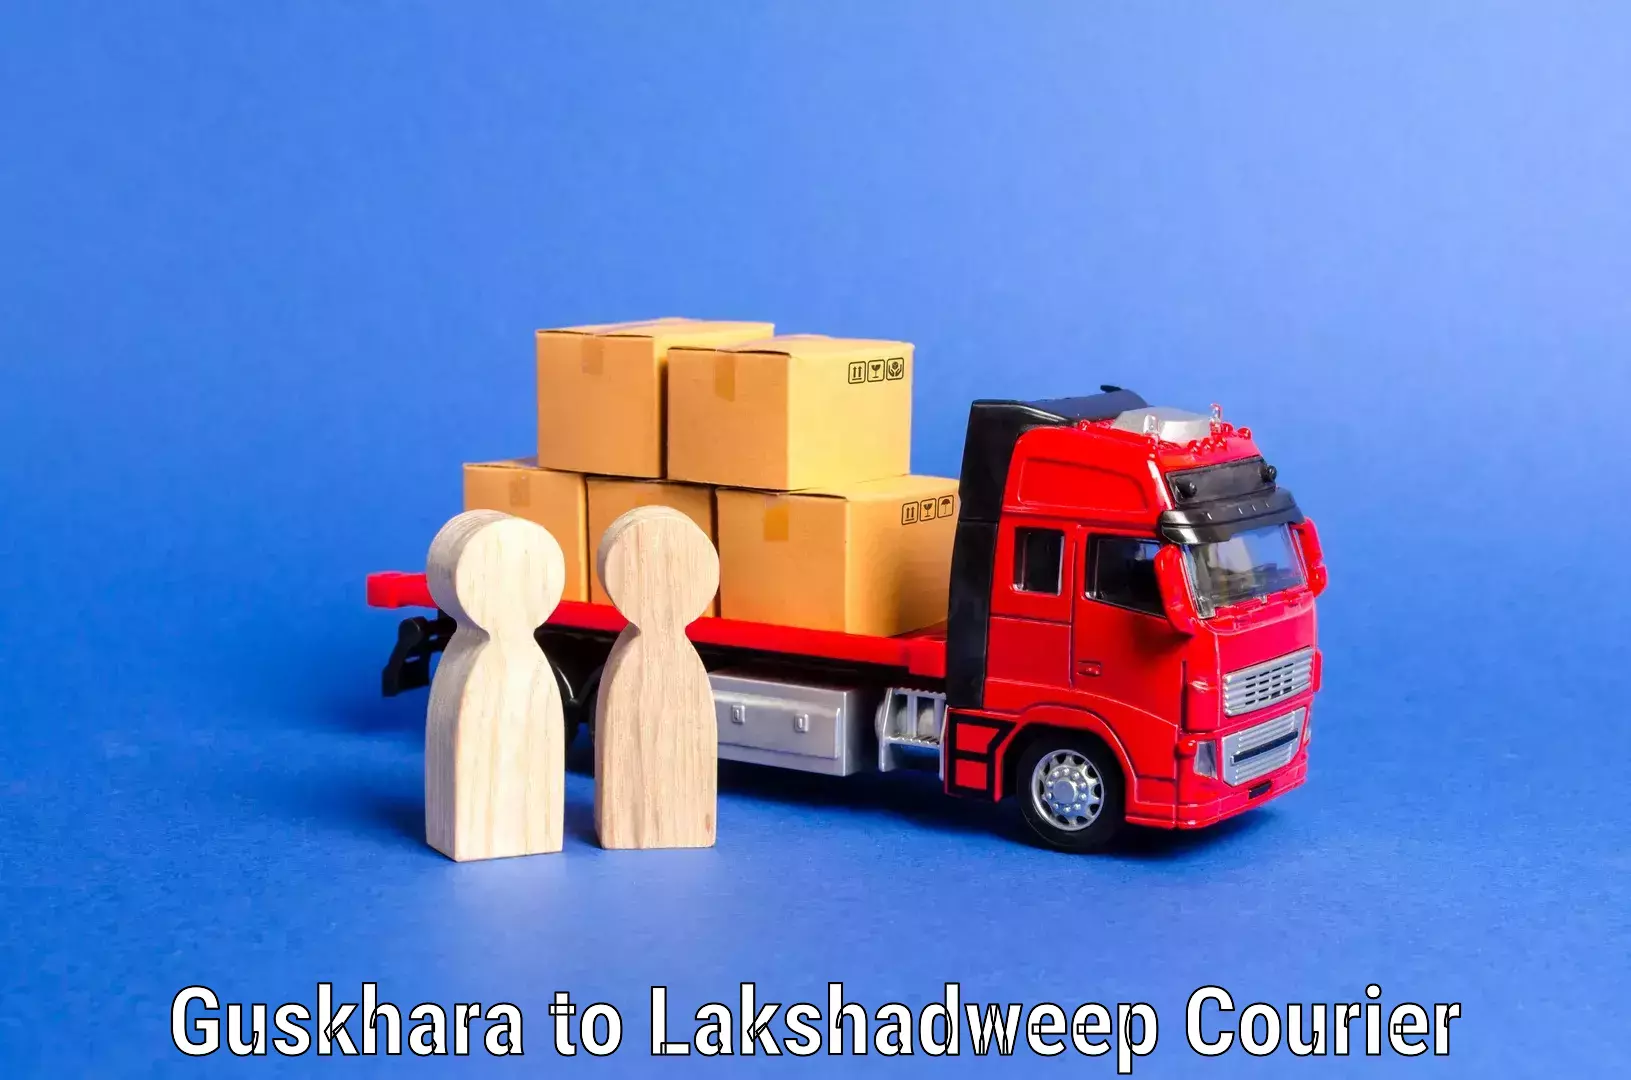 Quick relocation services in Guskhara to Lakshadweep